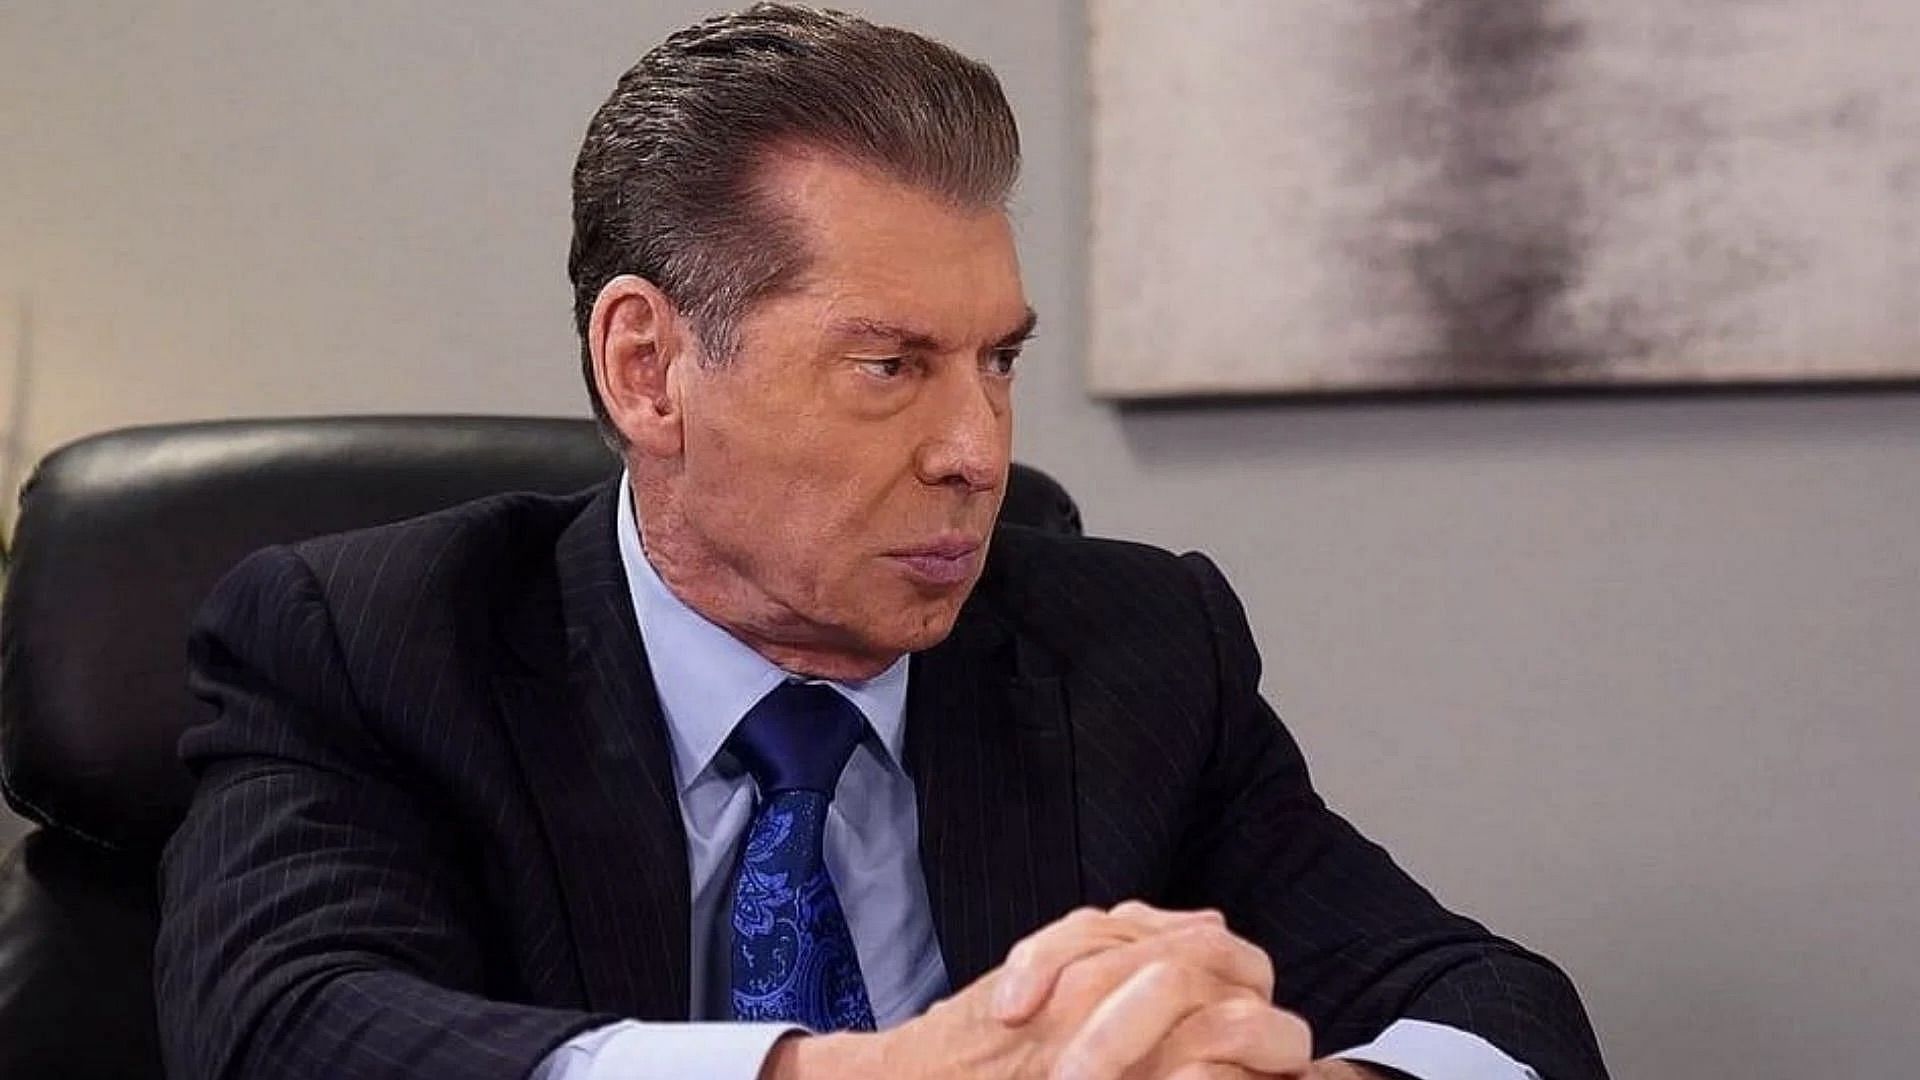 Former CEO and Chairman of WWE, Vince McMahon